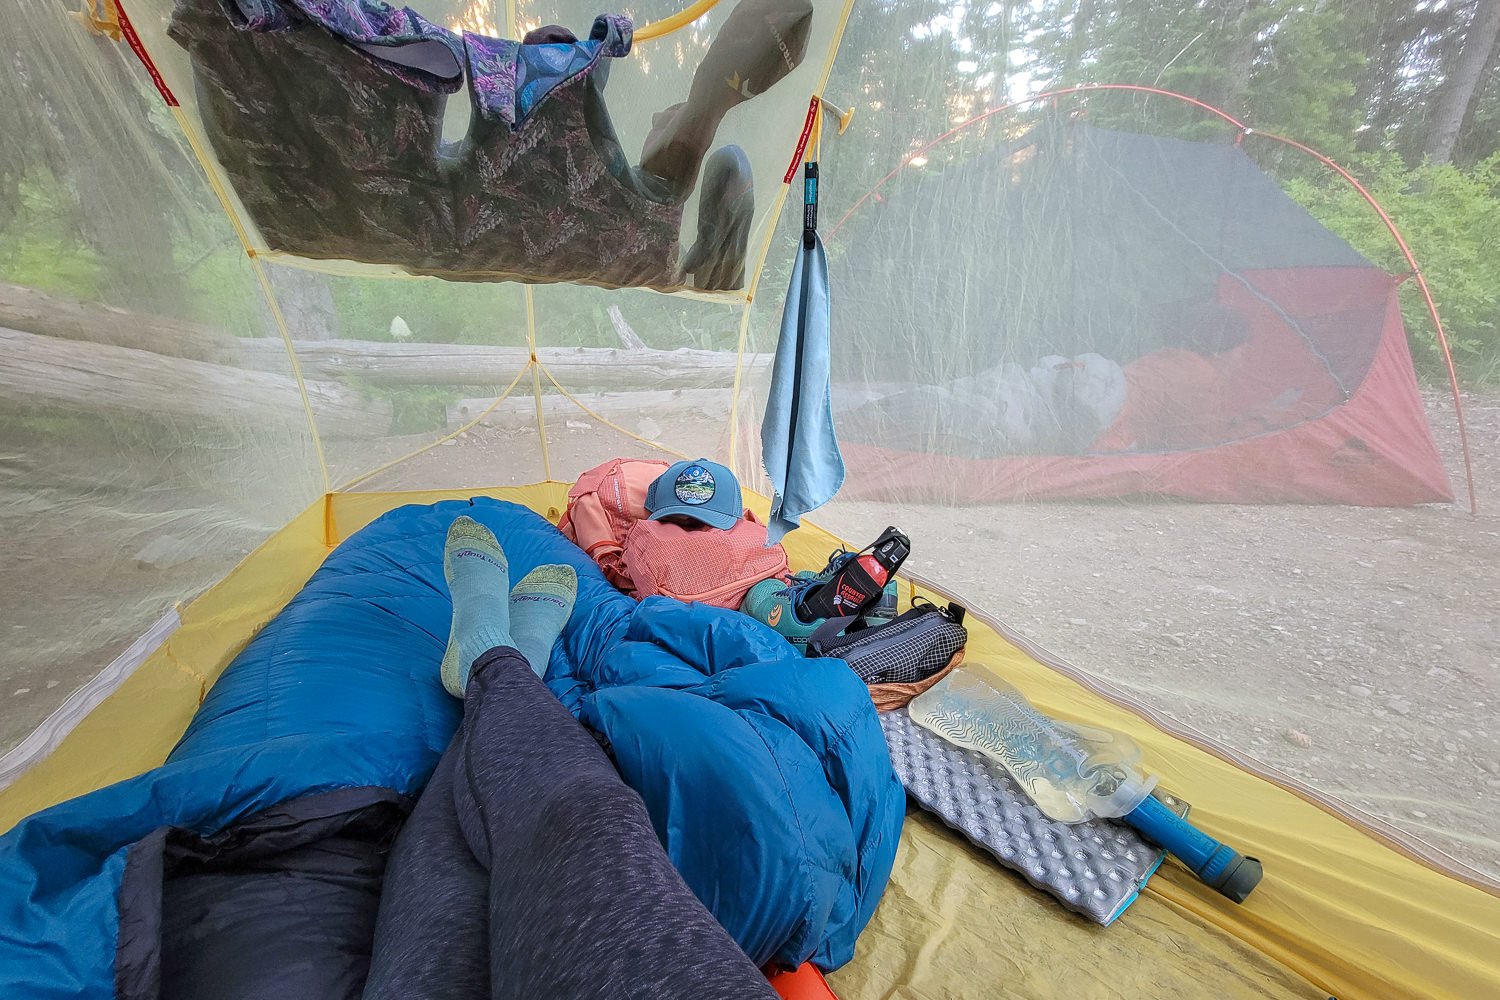 A hiker resting in a backpacking tent with the Platypus QuickDraw at her side